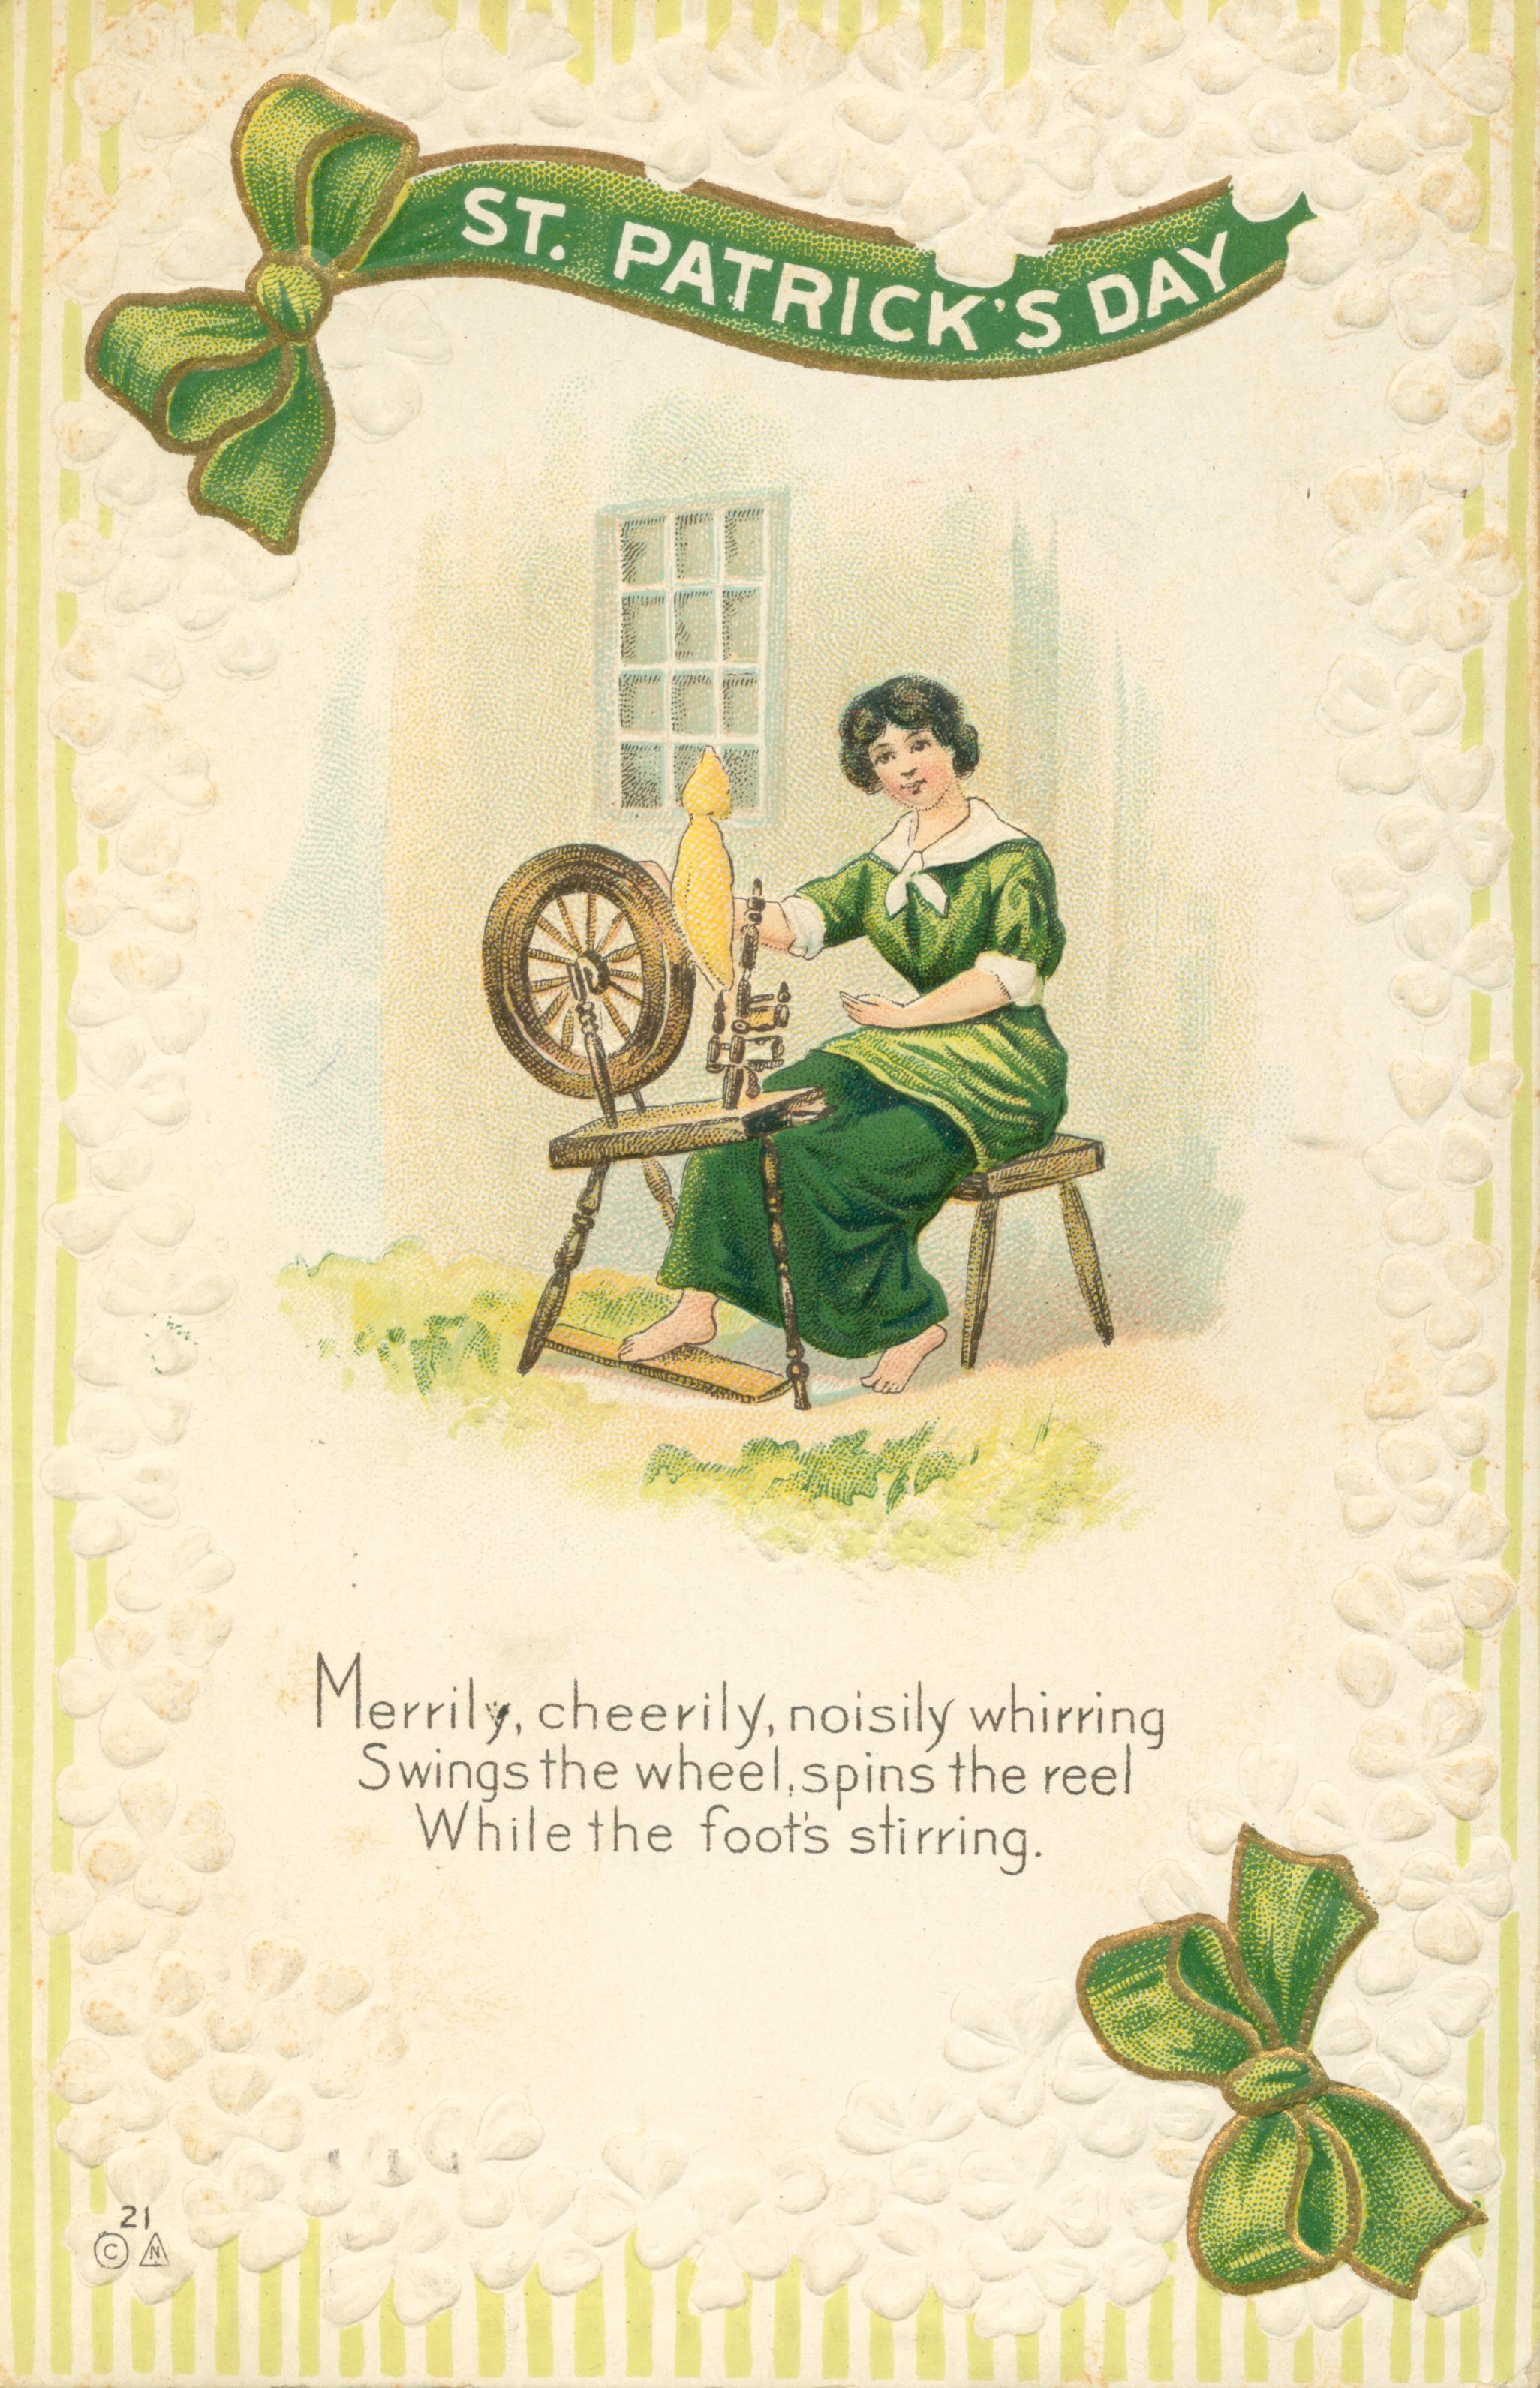 Shows a woman at a spinnining wheel above a poem